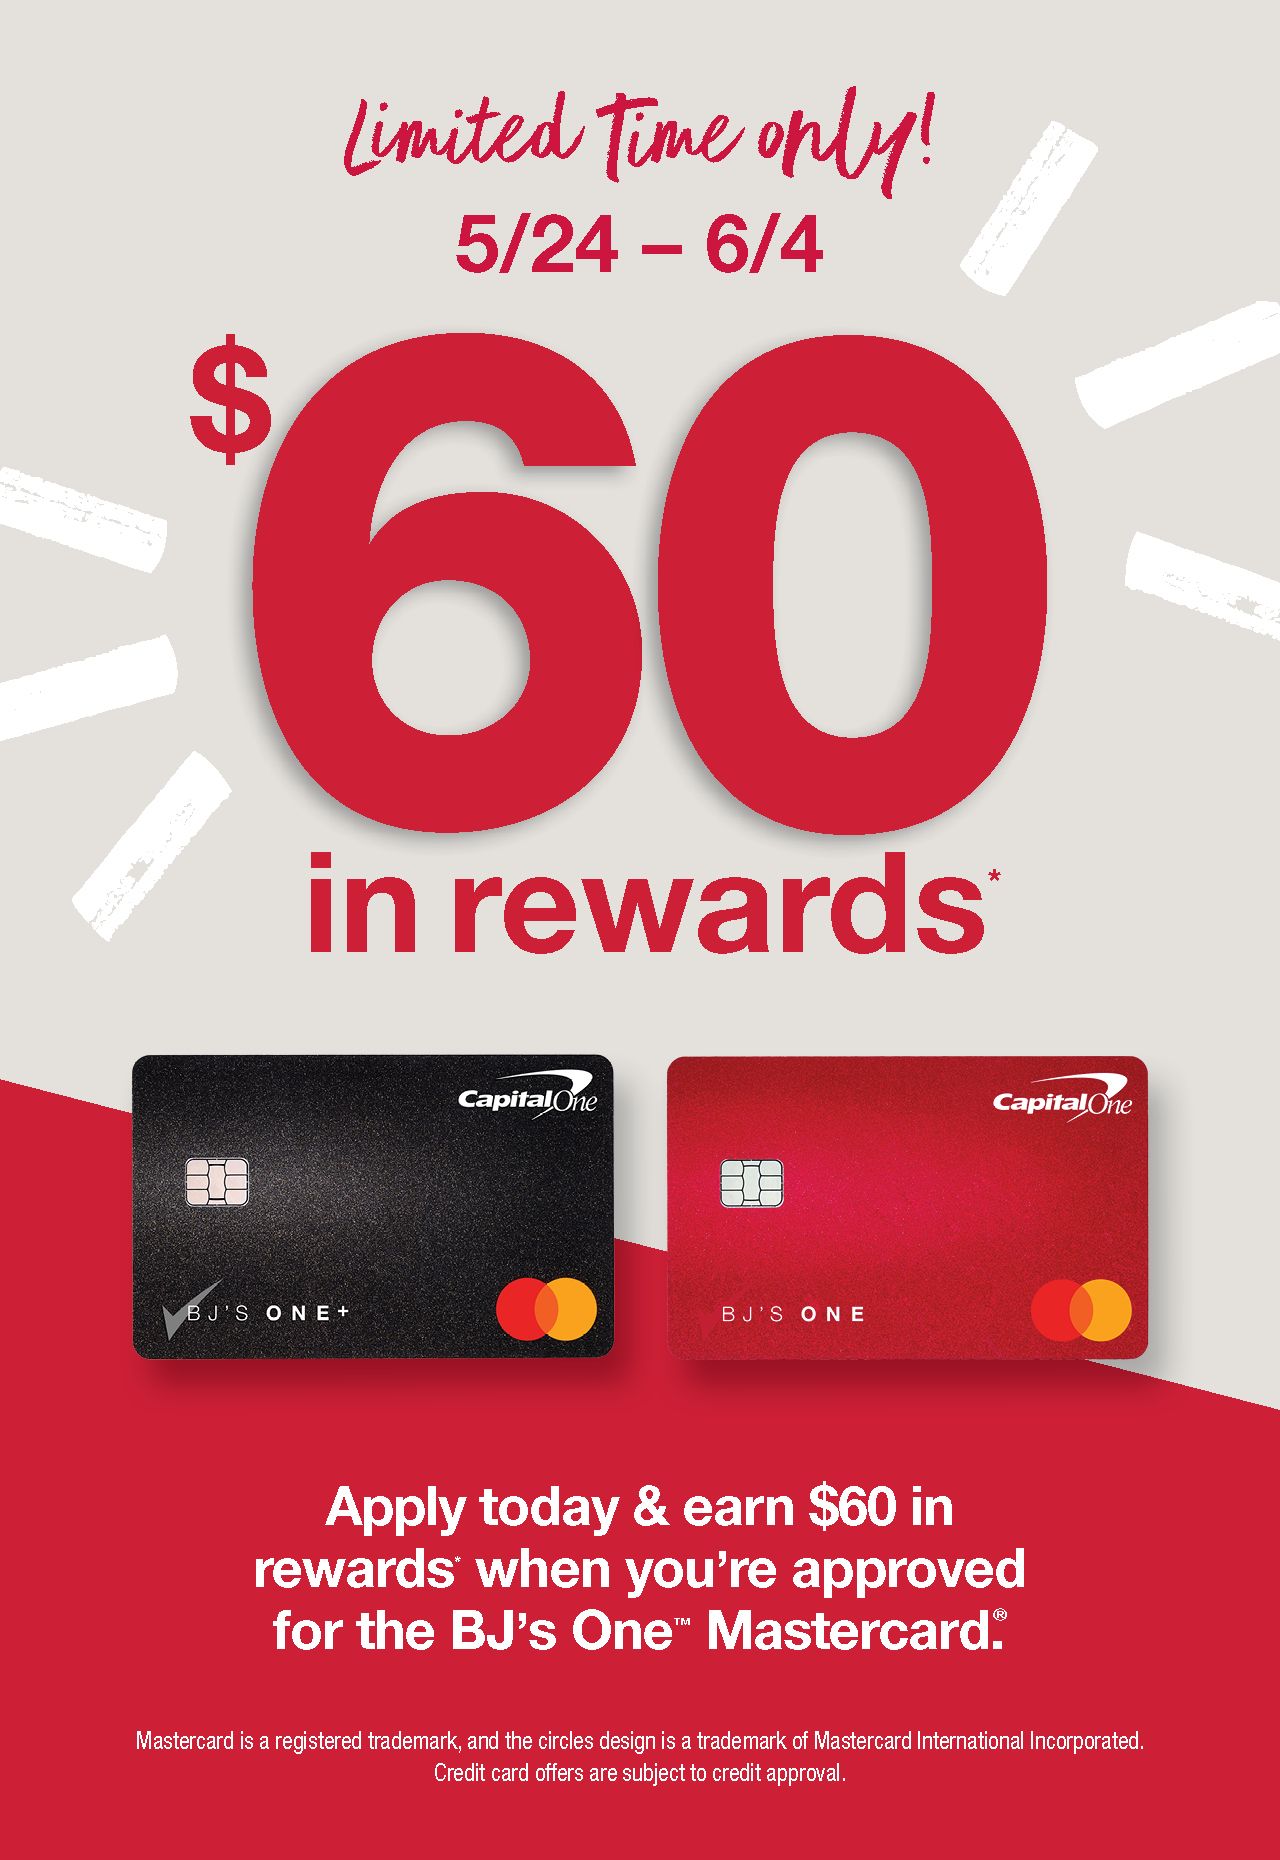 Limited time only! Apply today and earn $60 in rewards when you're approved for the BJ's One Mastercard. 5/24 to 6/04. See below for details